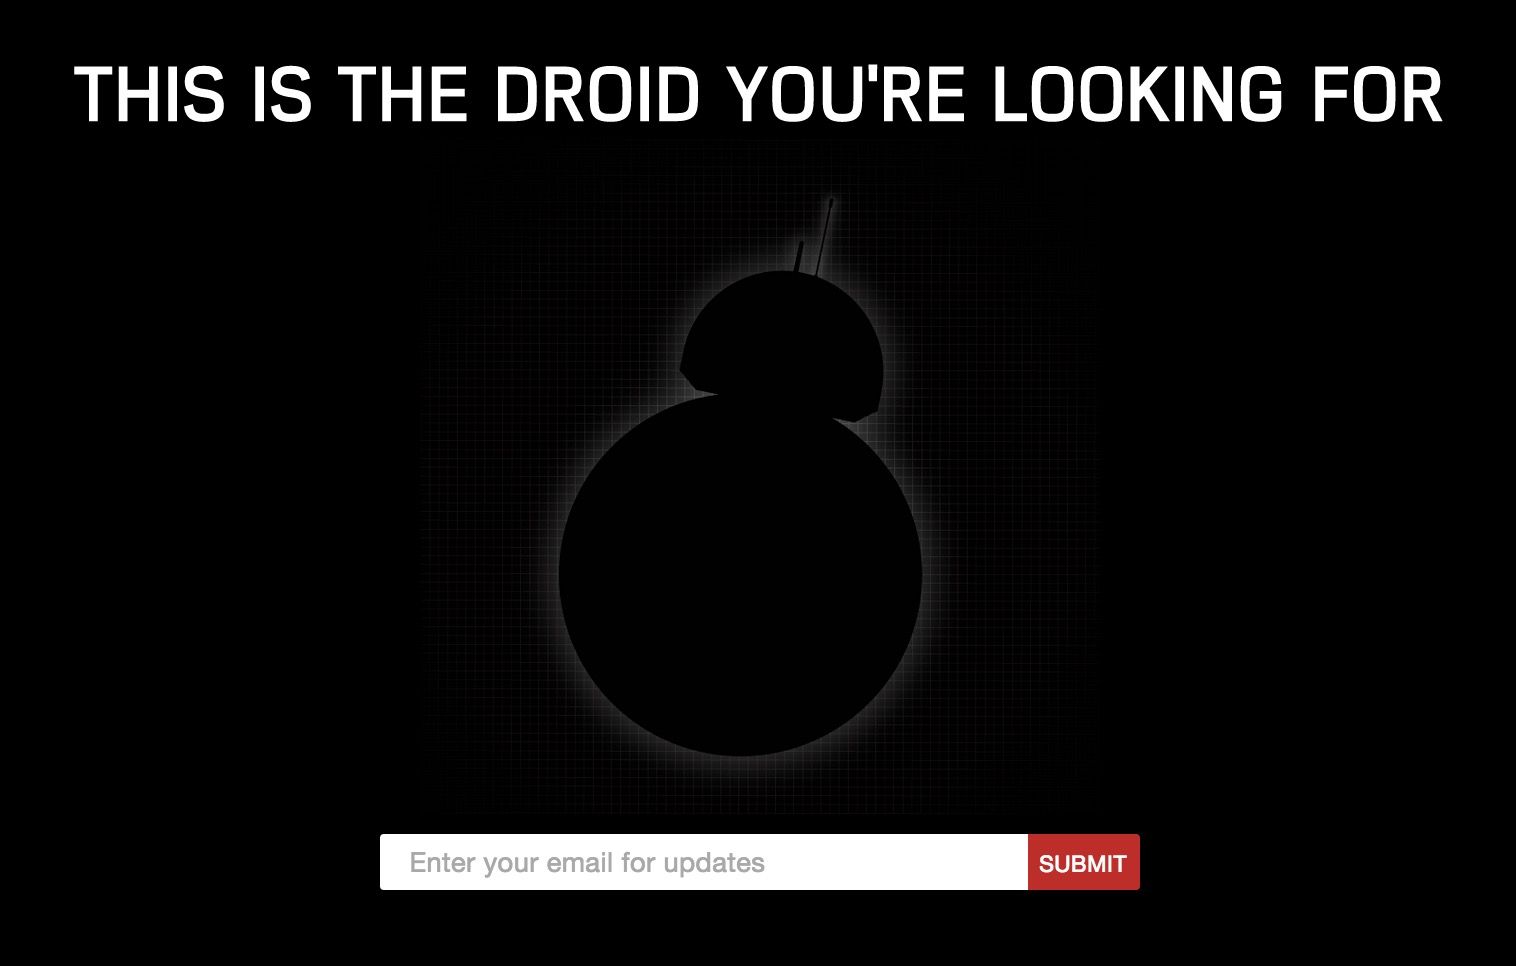 bb 8 droid sphero is making the official star wars toy but you can make one now image 2